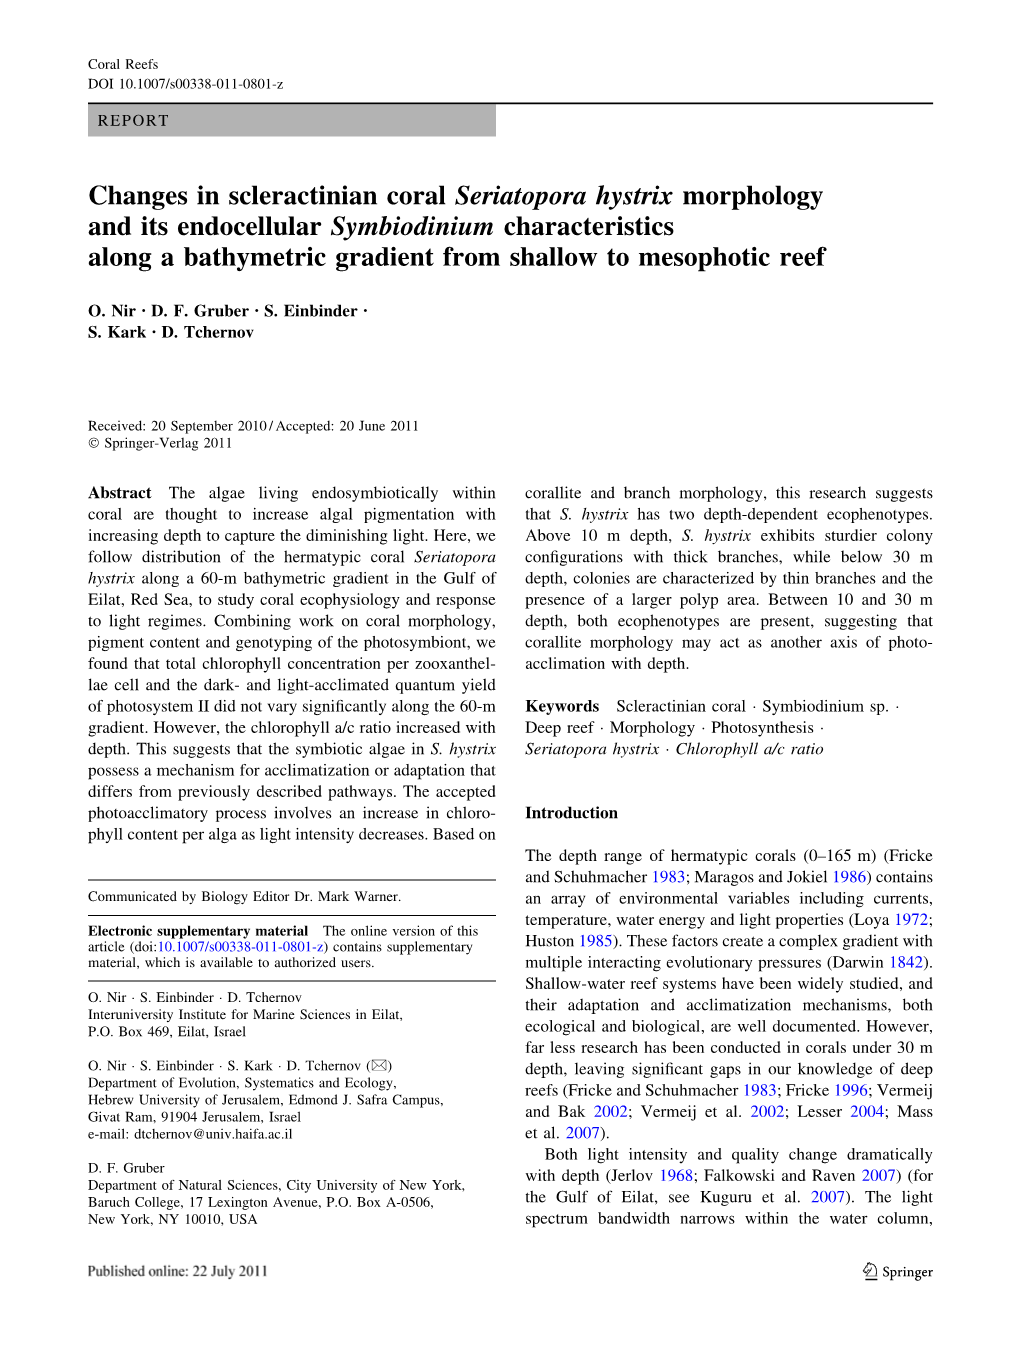 Changes in Scleractinian Coral Seriatopora Hystrix Morphology And